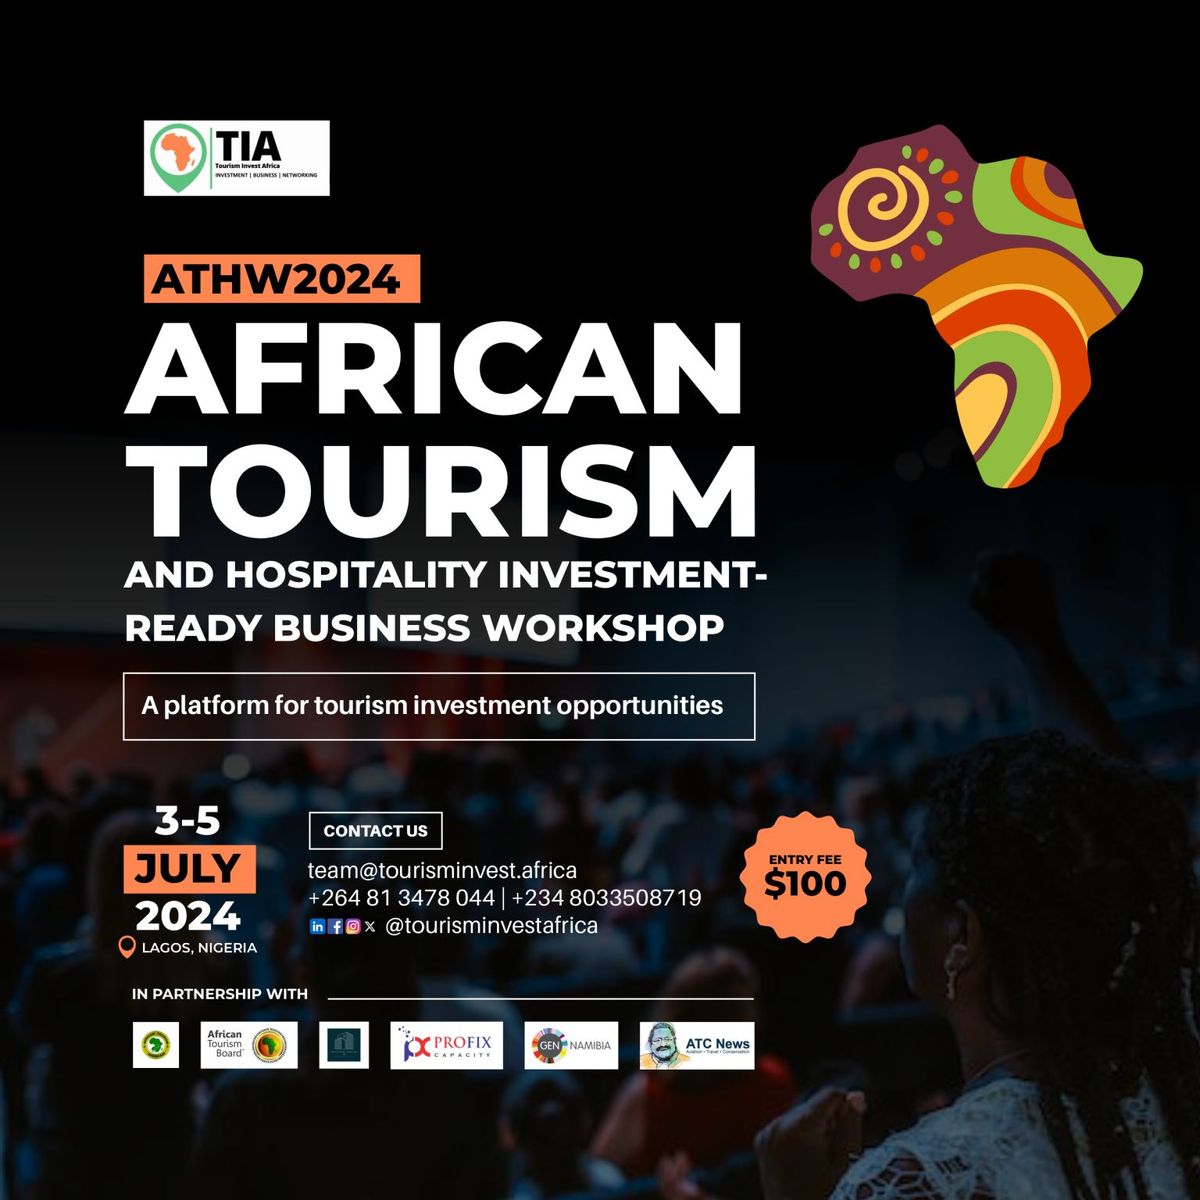 ATHW2024 - AFRICAN TOURISM AND HOSPITALITY INVESTMENT-READY BUSINESS WORKSHOP